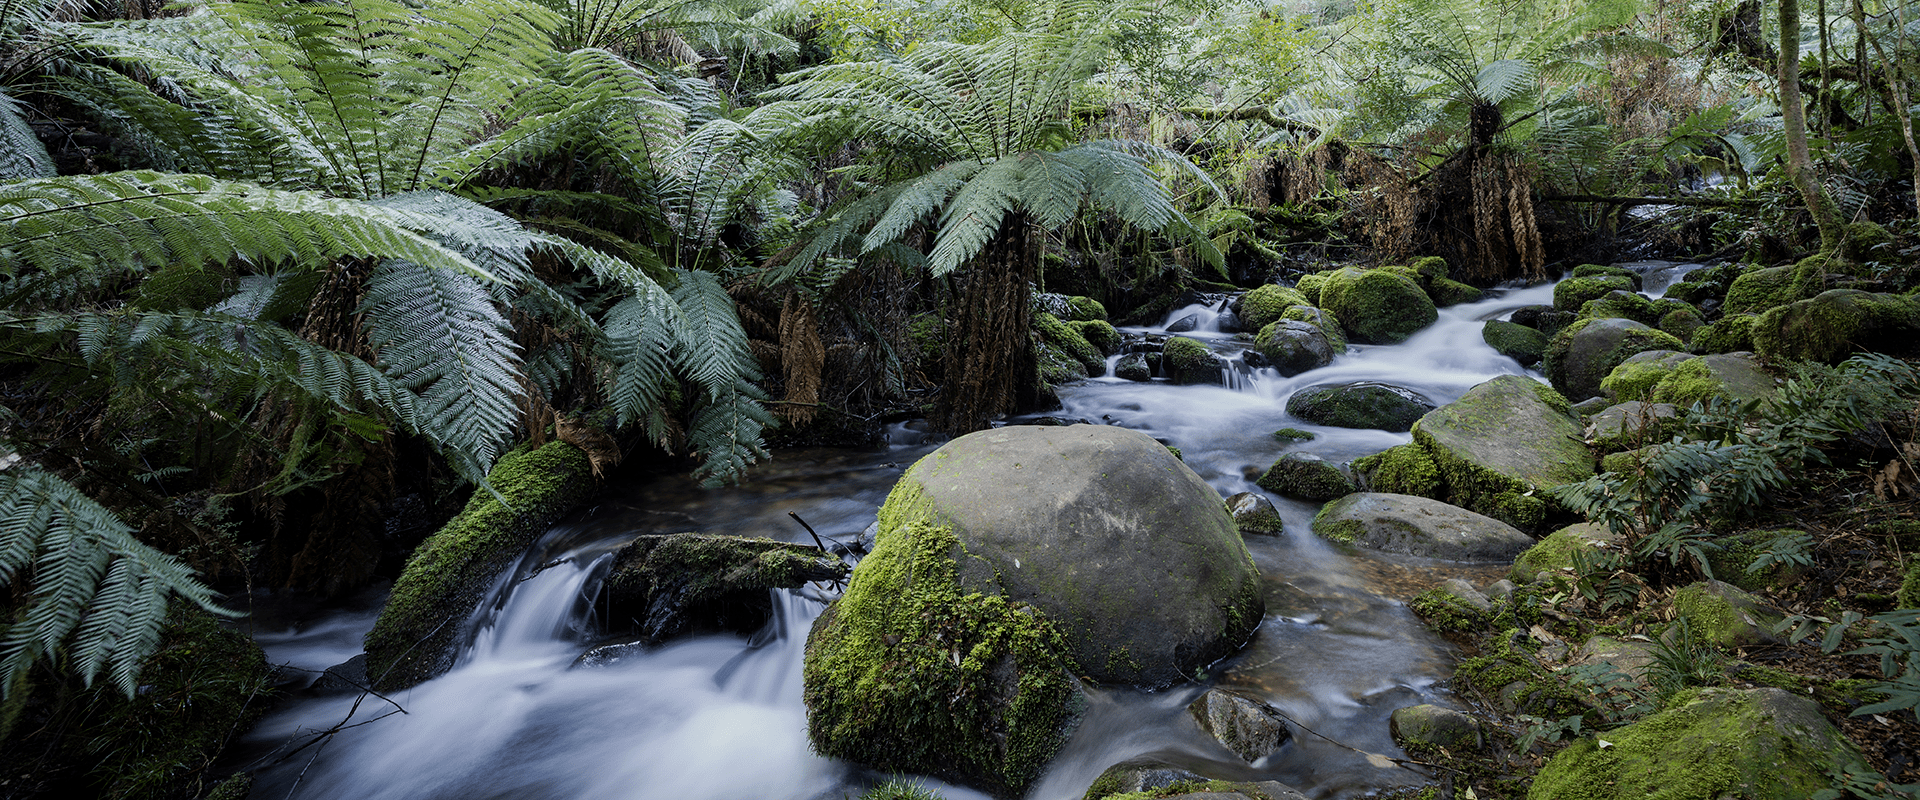 A mountain creek flows over moss covered rocks and boulders in a temperate rainforest, the creek is lined by tall tree ferns.